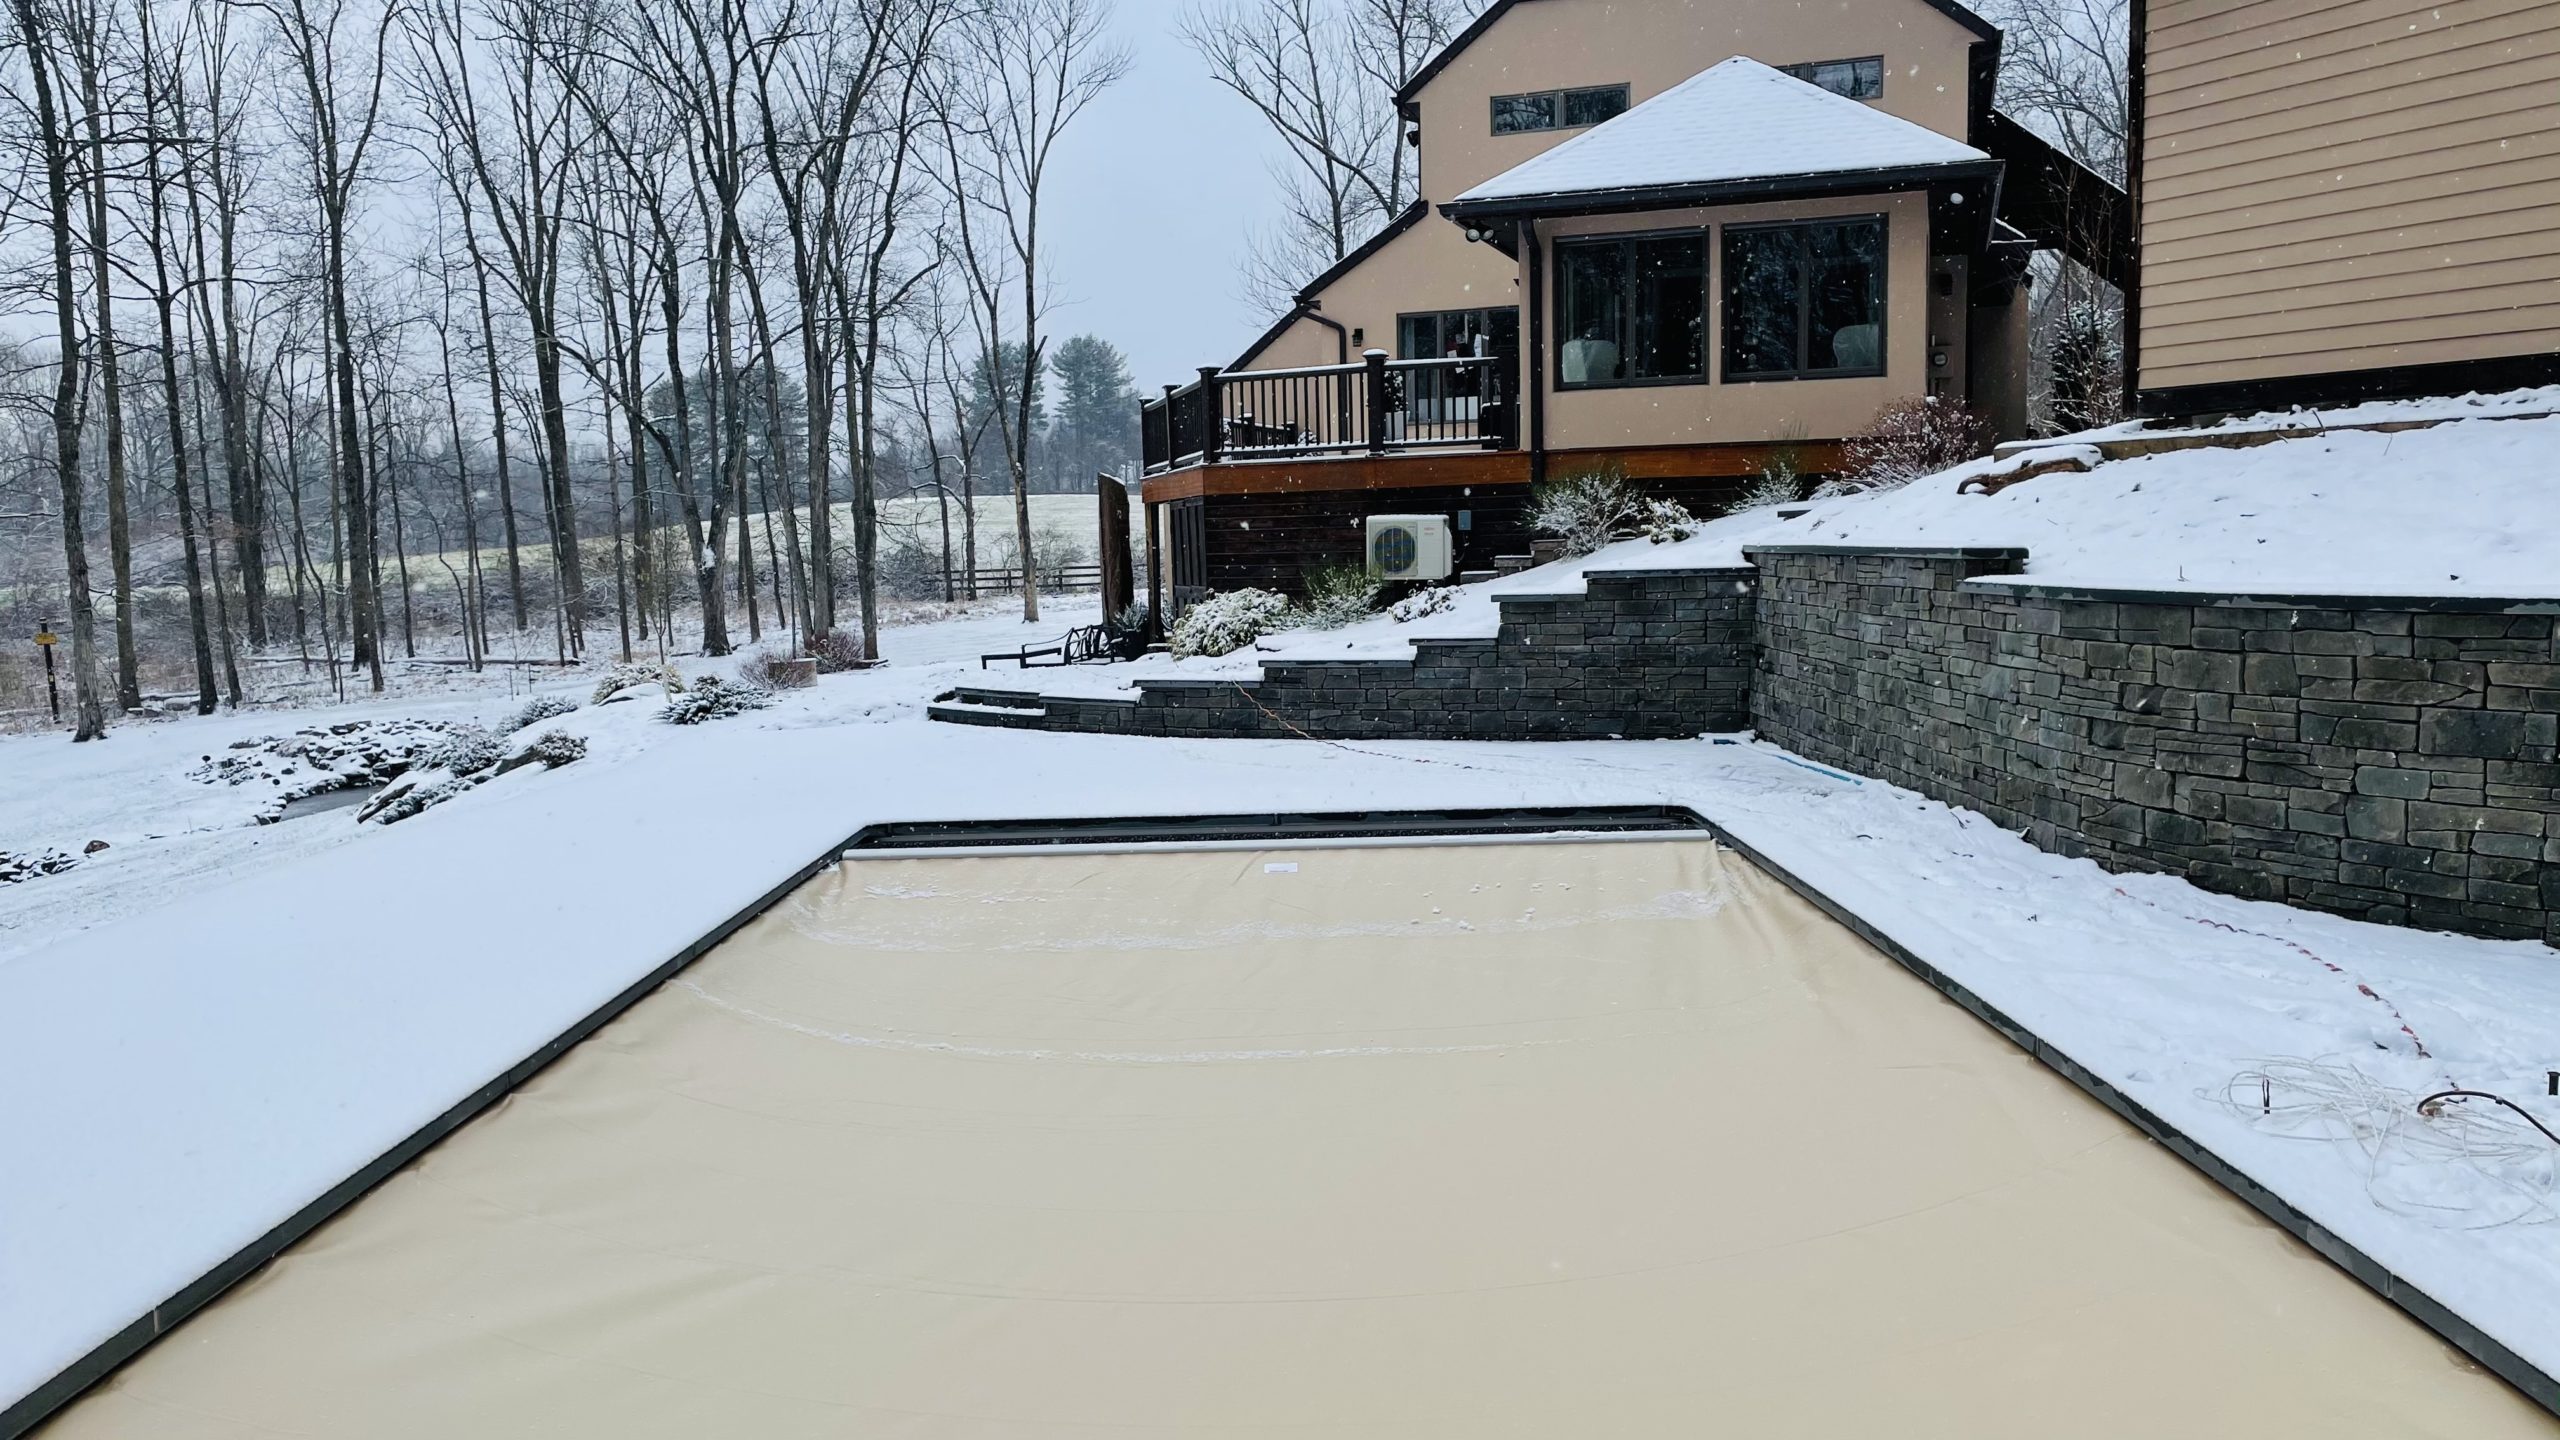 https://coversafe.com/wp-content/uploads/2021/12/Winter-Automatic-Pool-Cover-scaled.jpg